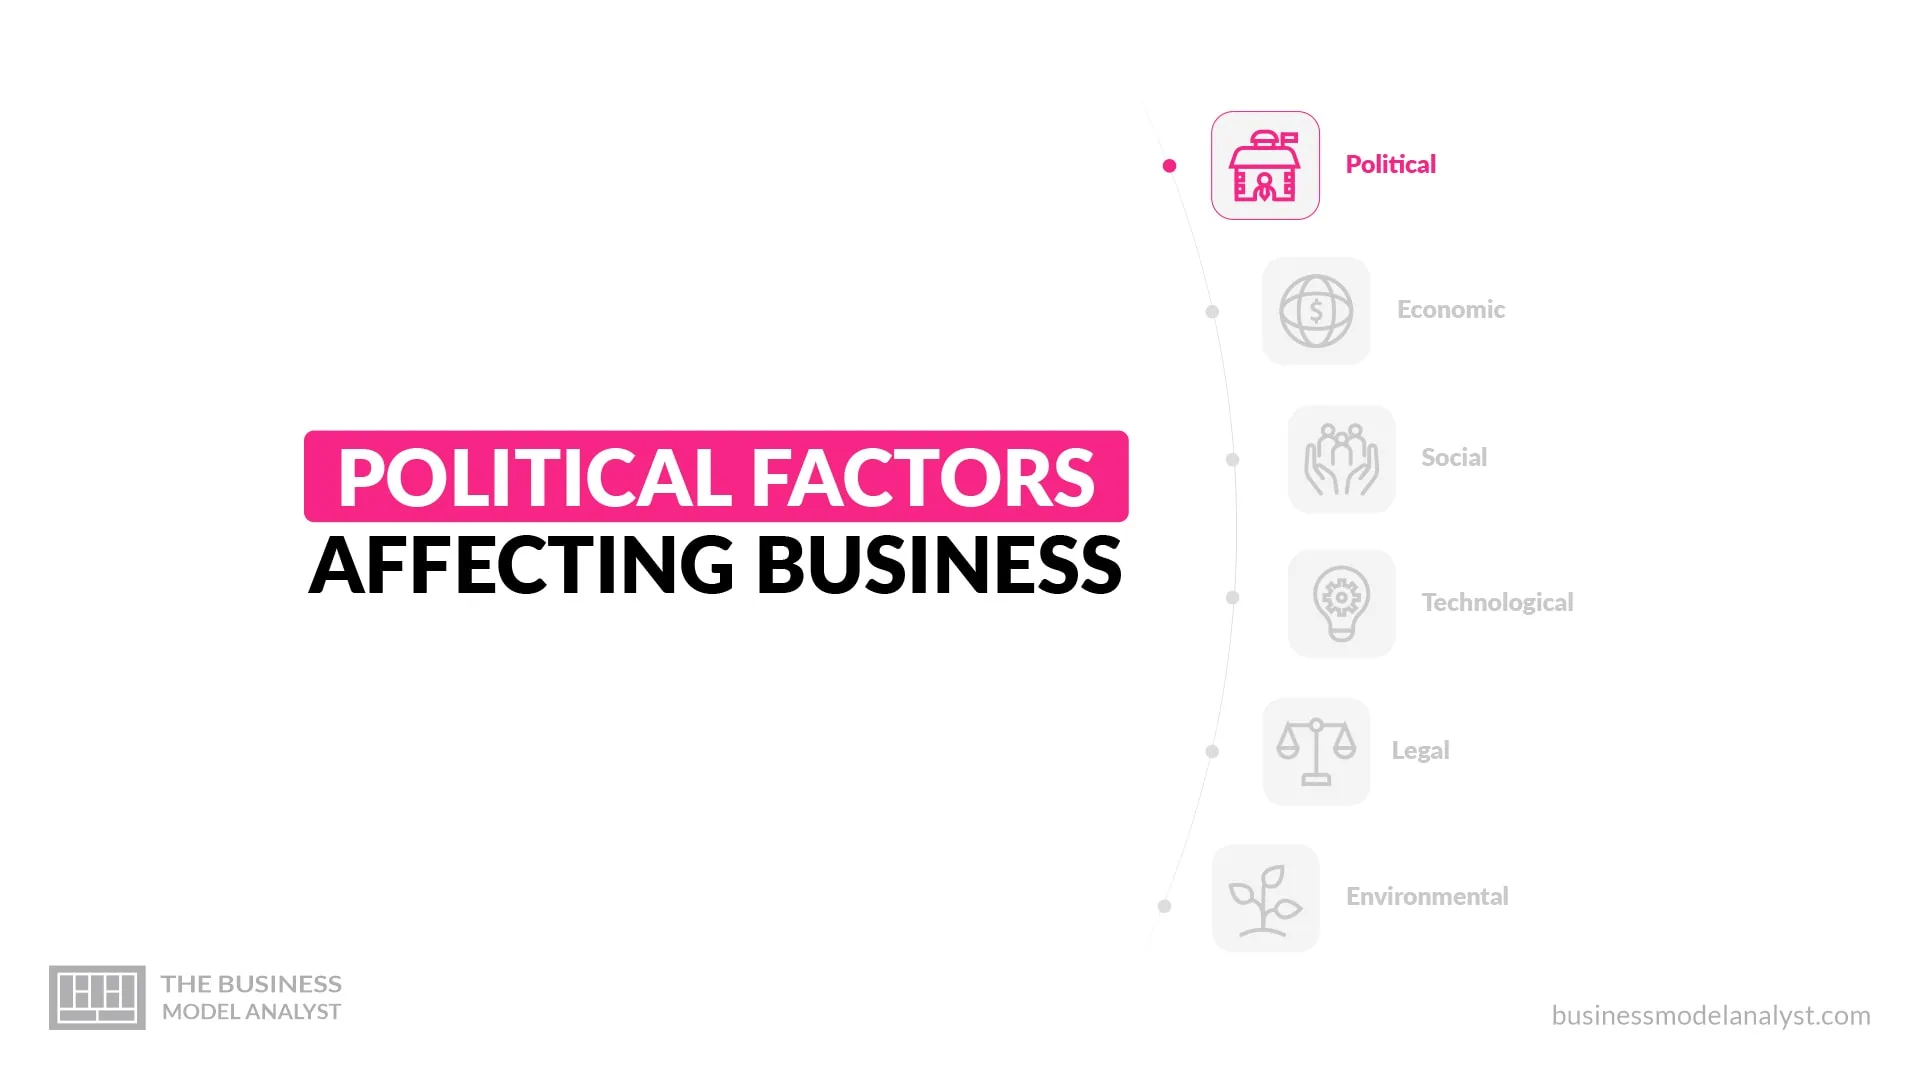 PESTLE Analysis: Political Factors Affecting Business